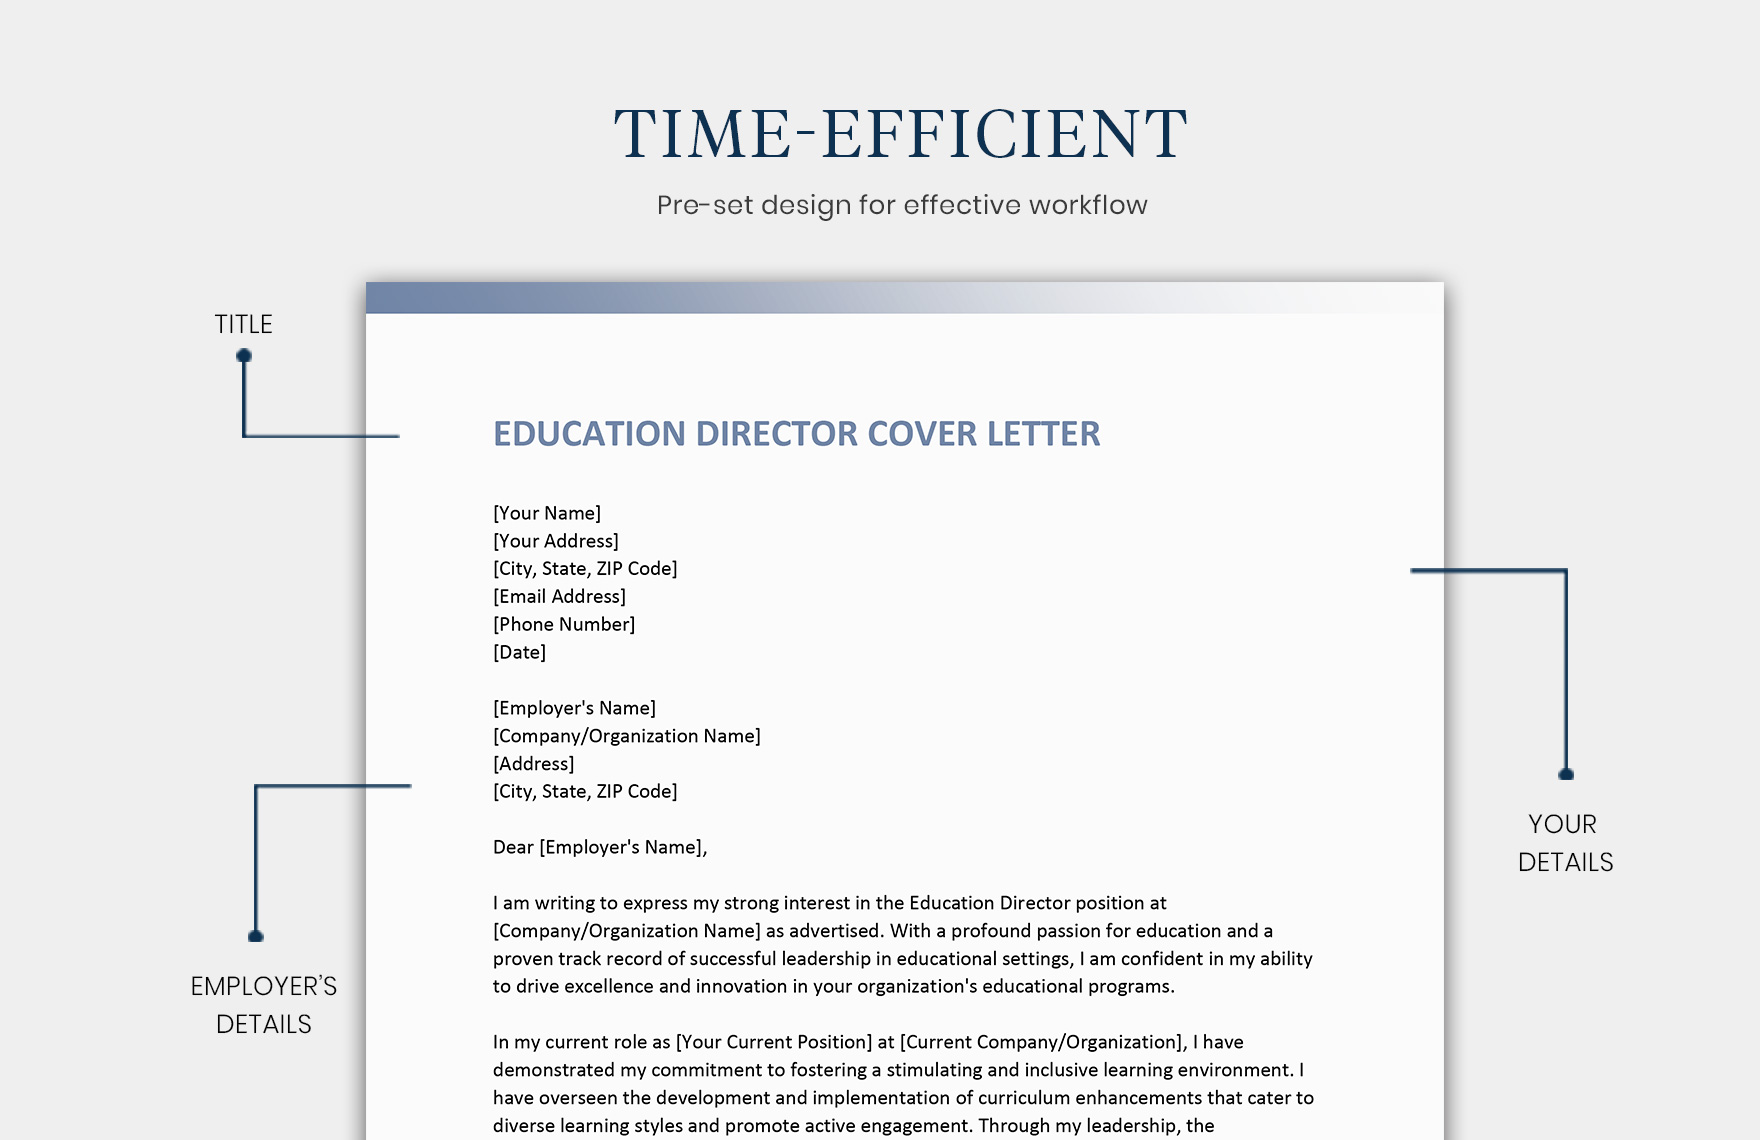 Education Director Cover Letter